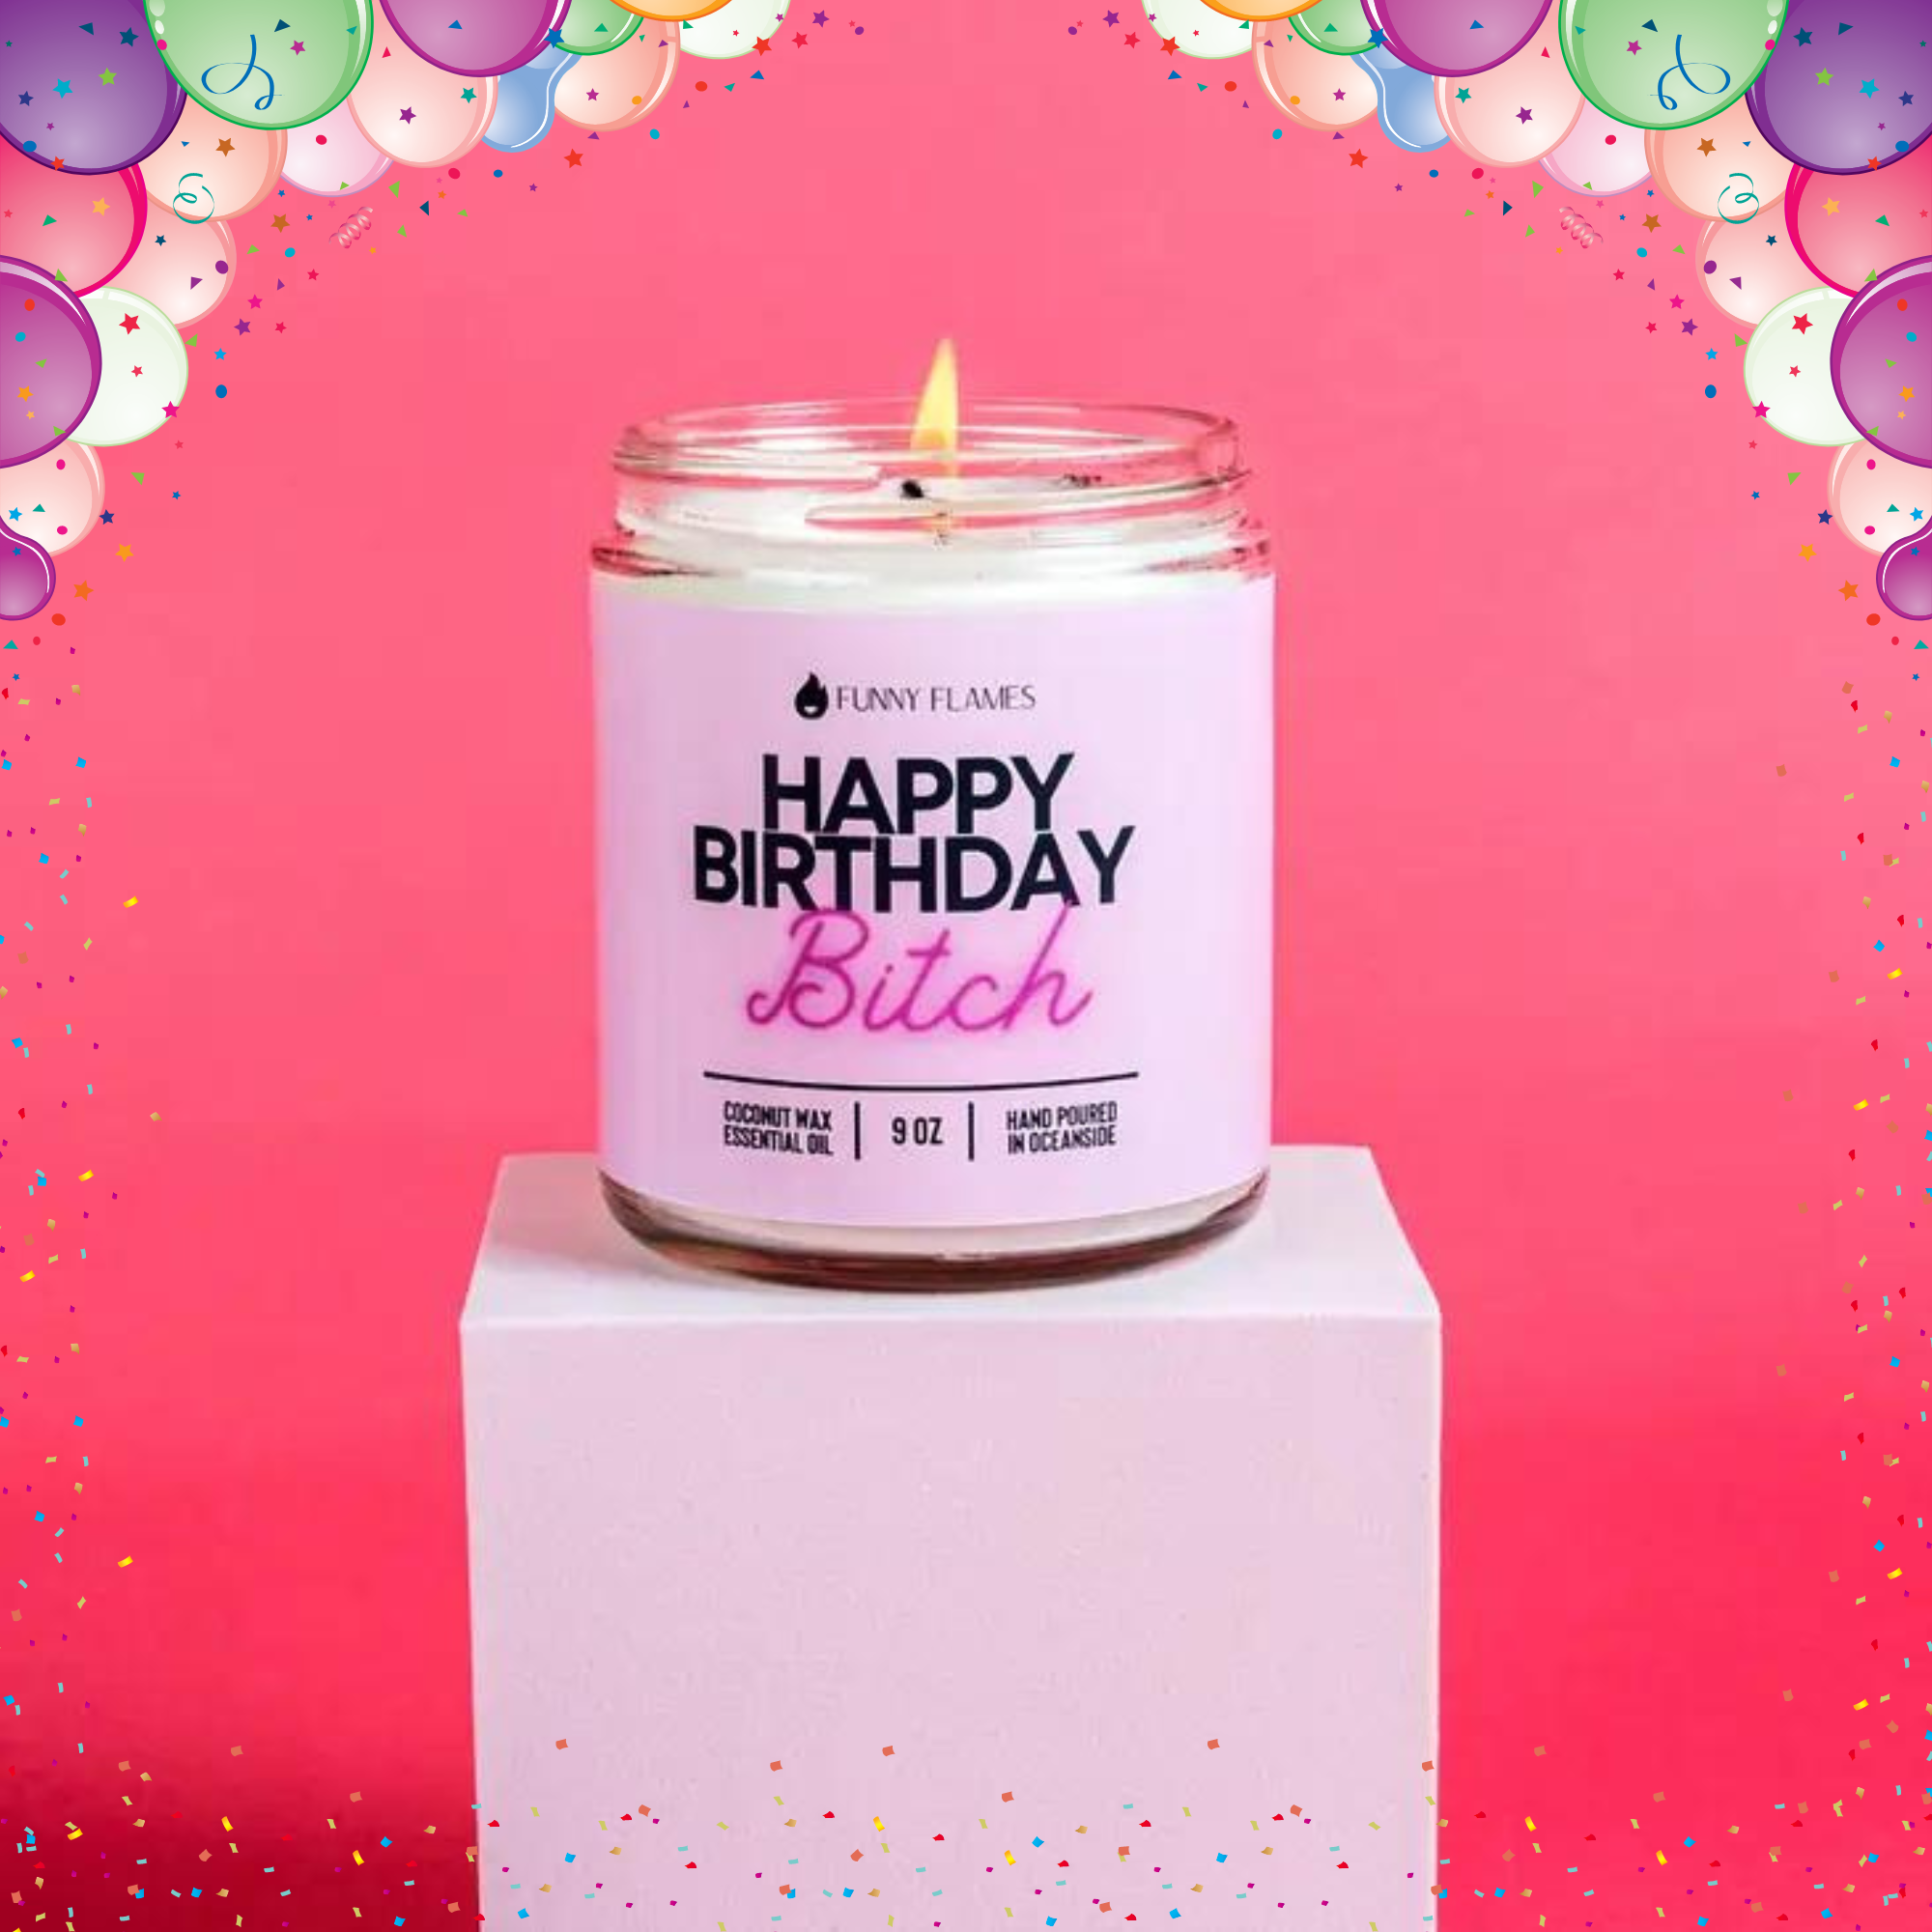 Playful and comical candles for birthday celebrations